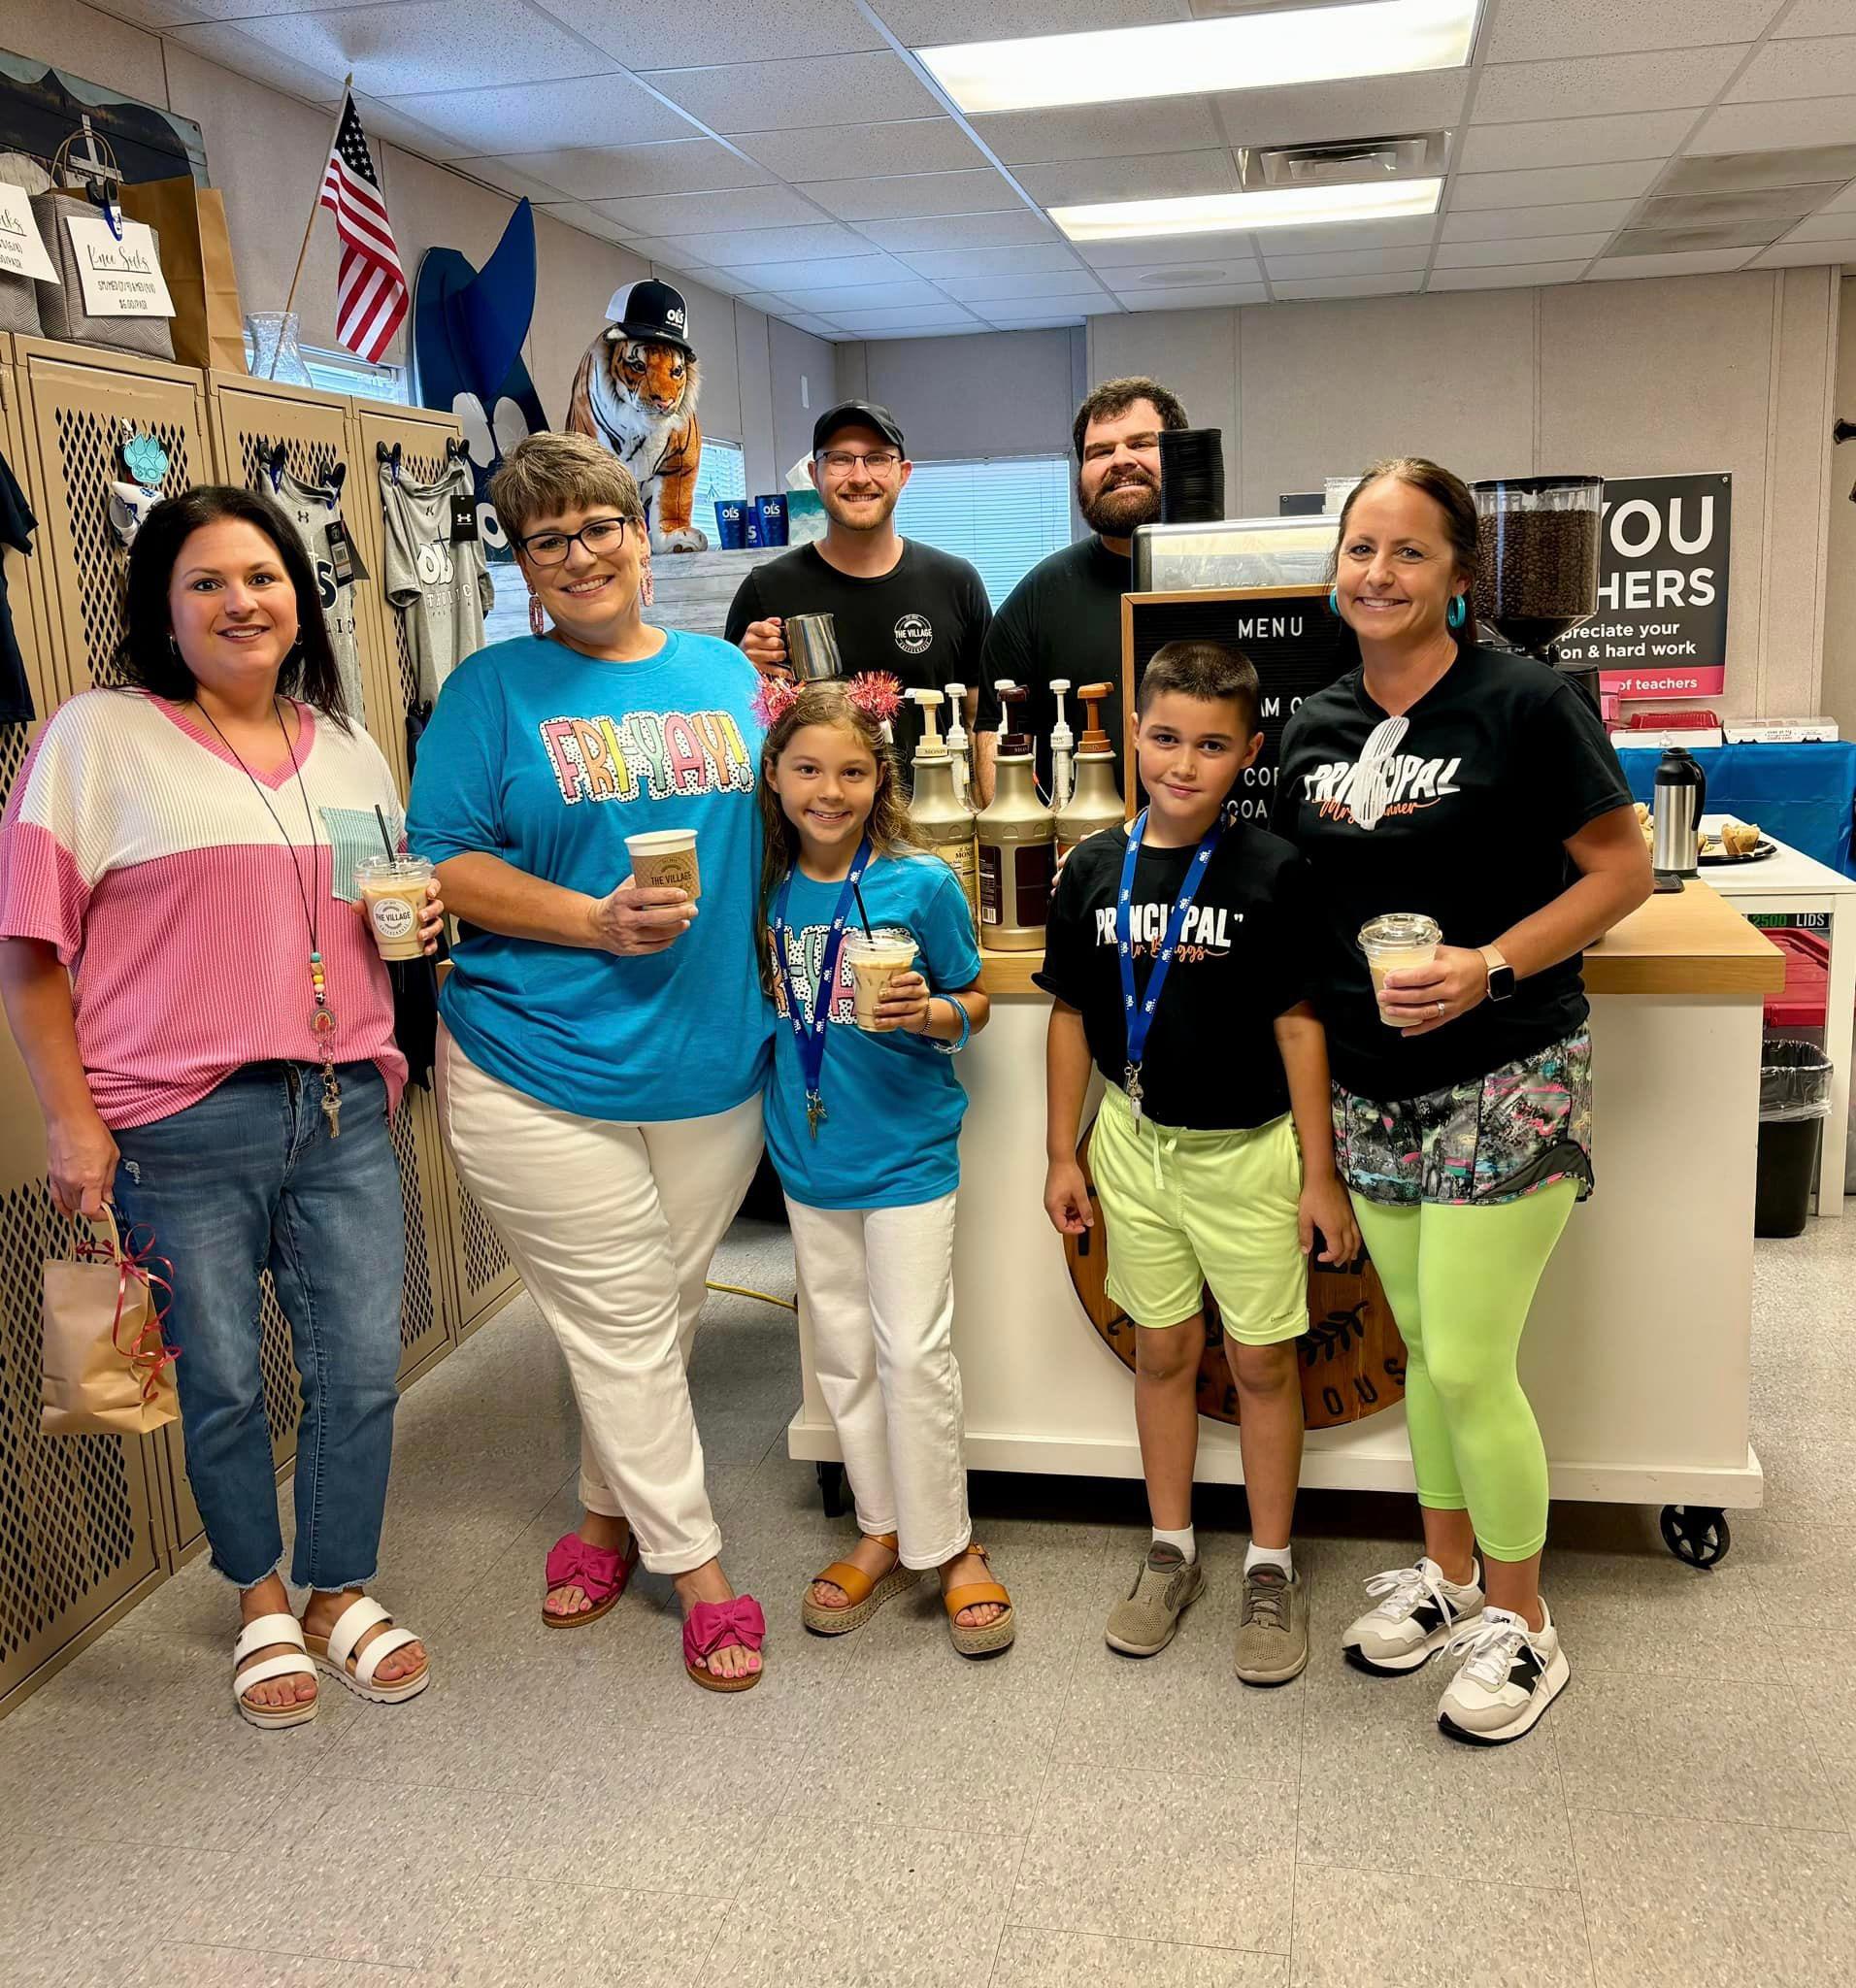 We hope the staff at Our Lady's School enjoyed their coffee and pastries this morning!Thank you to T Jennifer Mabou - State Farm Insurance Agent Sulphur (337)527-0027